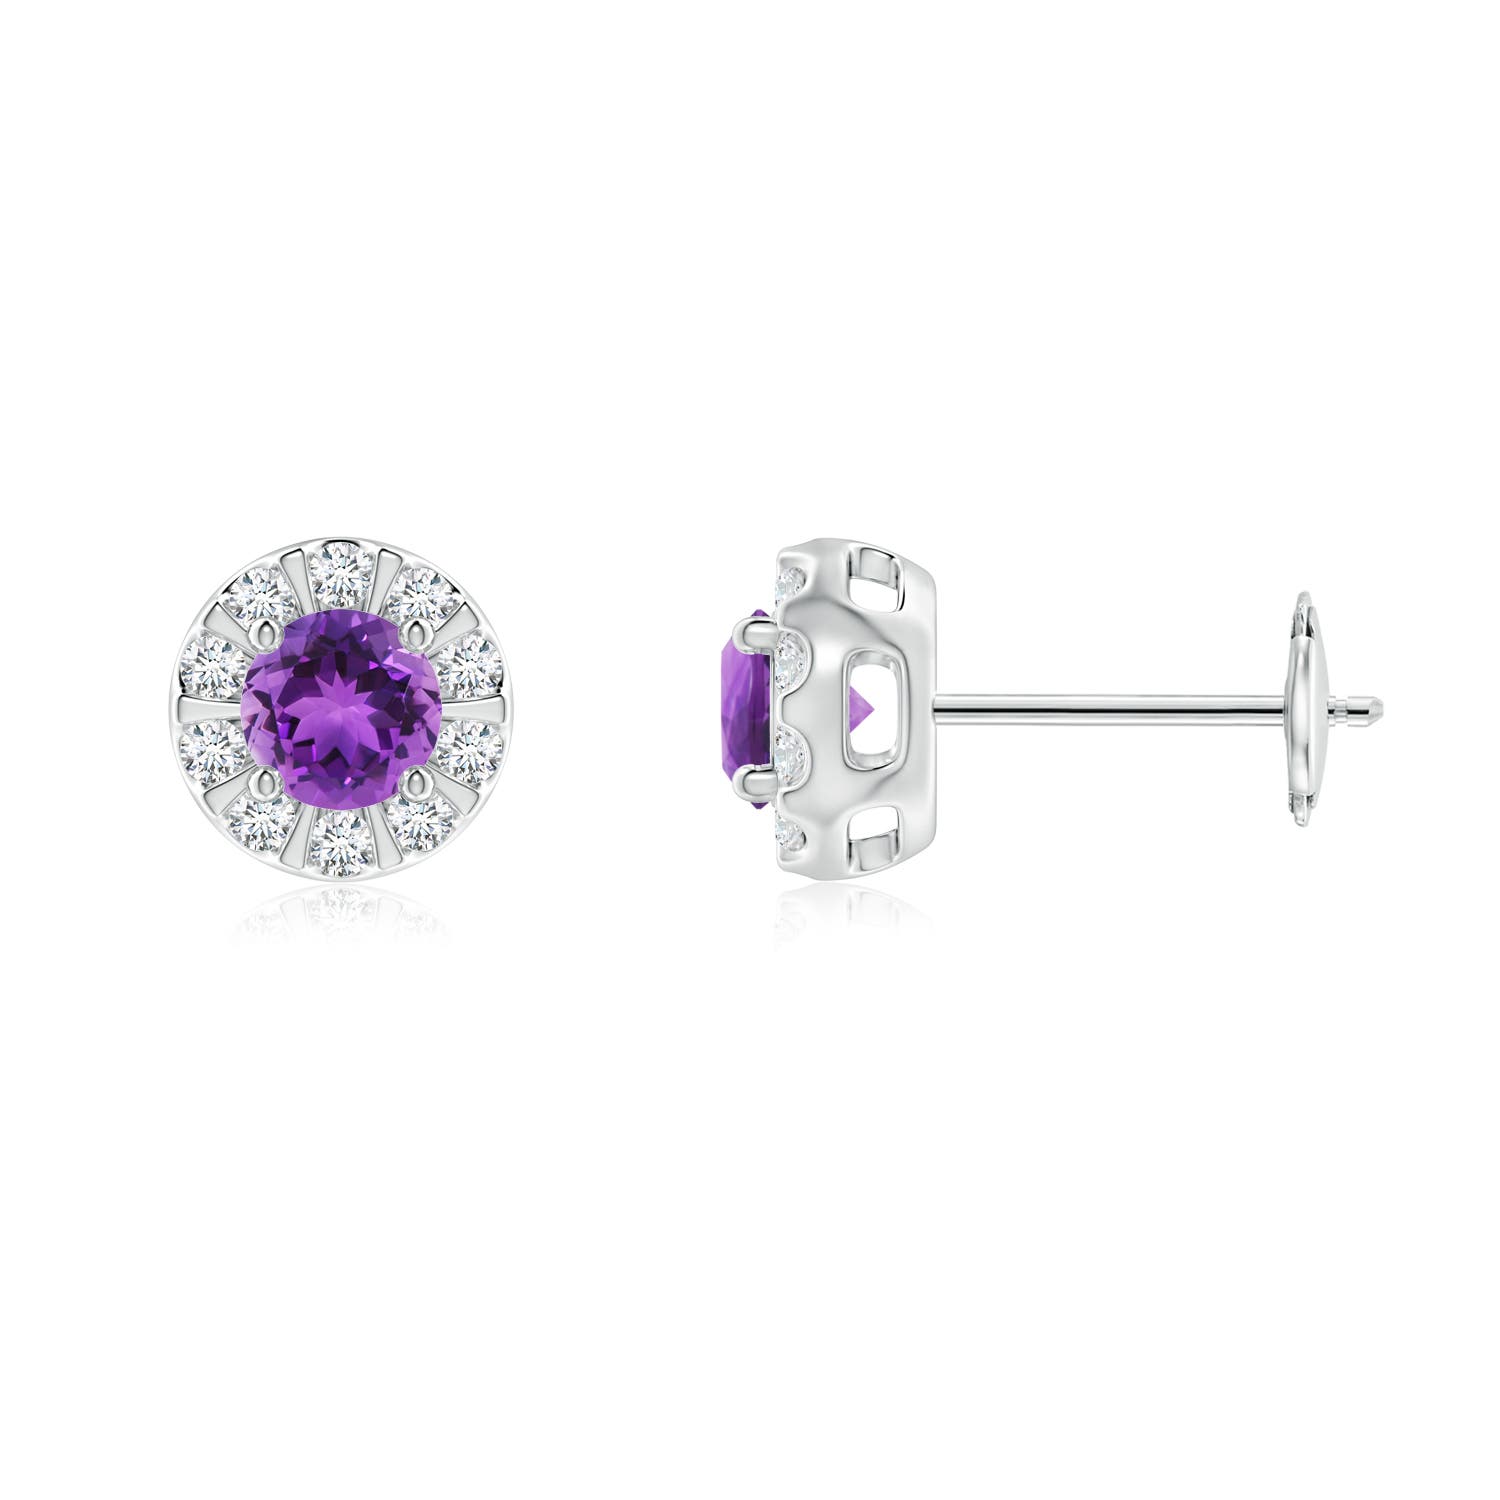 AAA - Amethyst / 0.7 CT / 14 KT White Gold